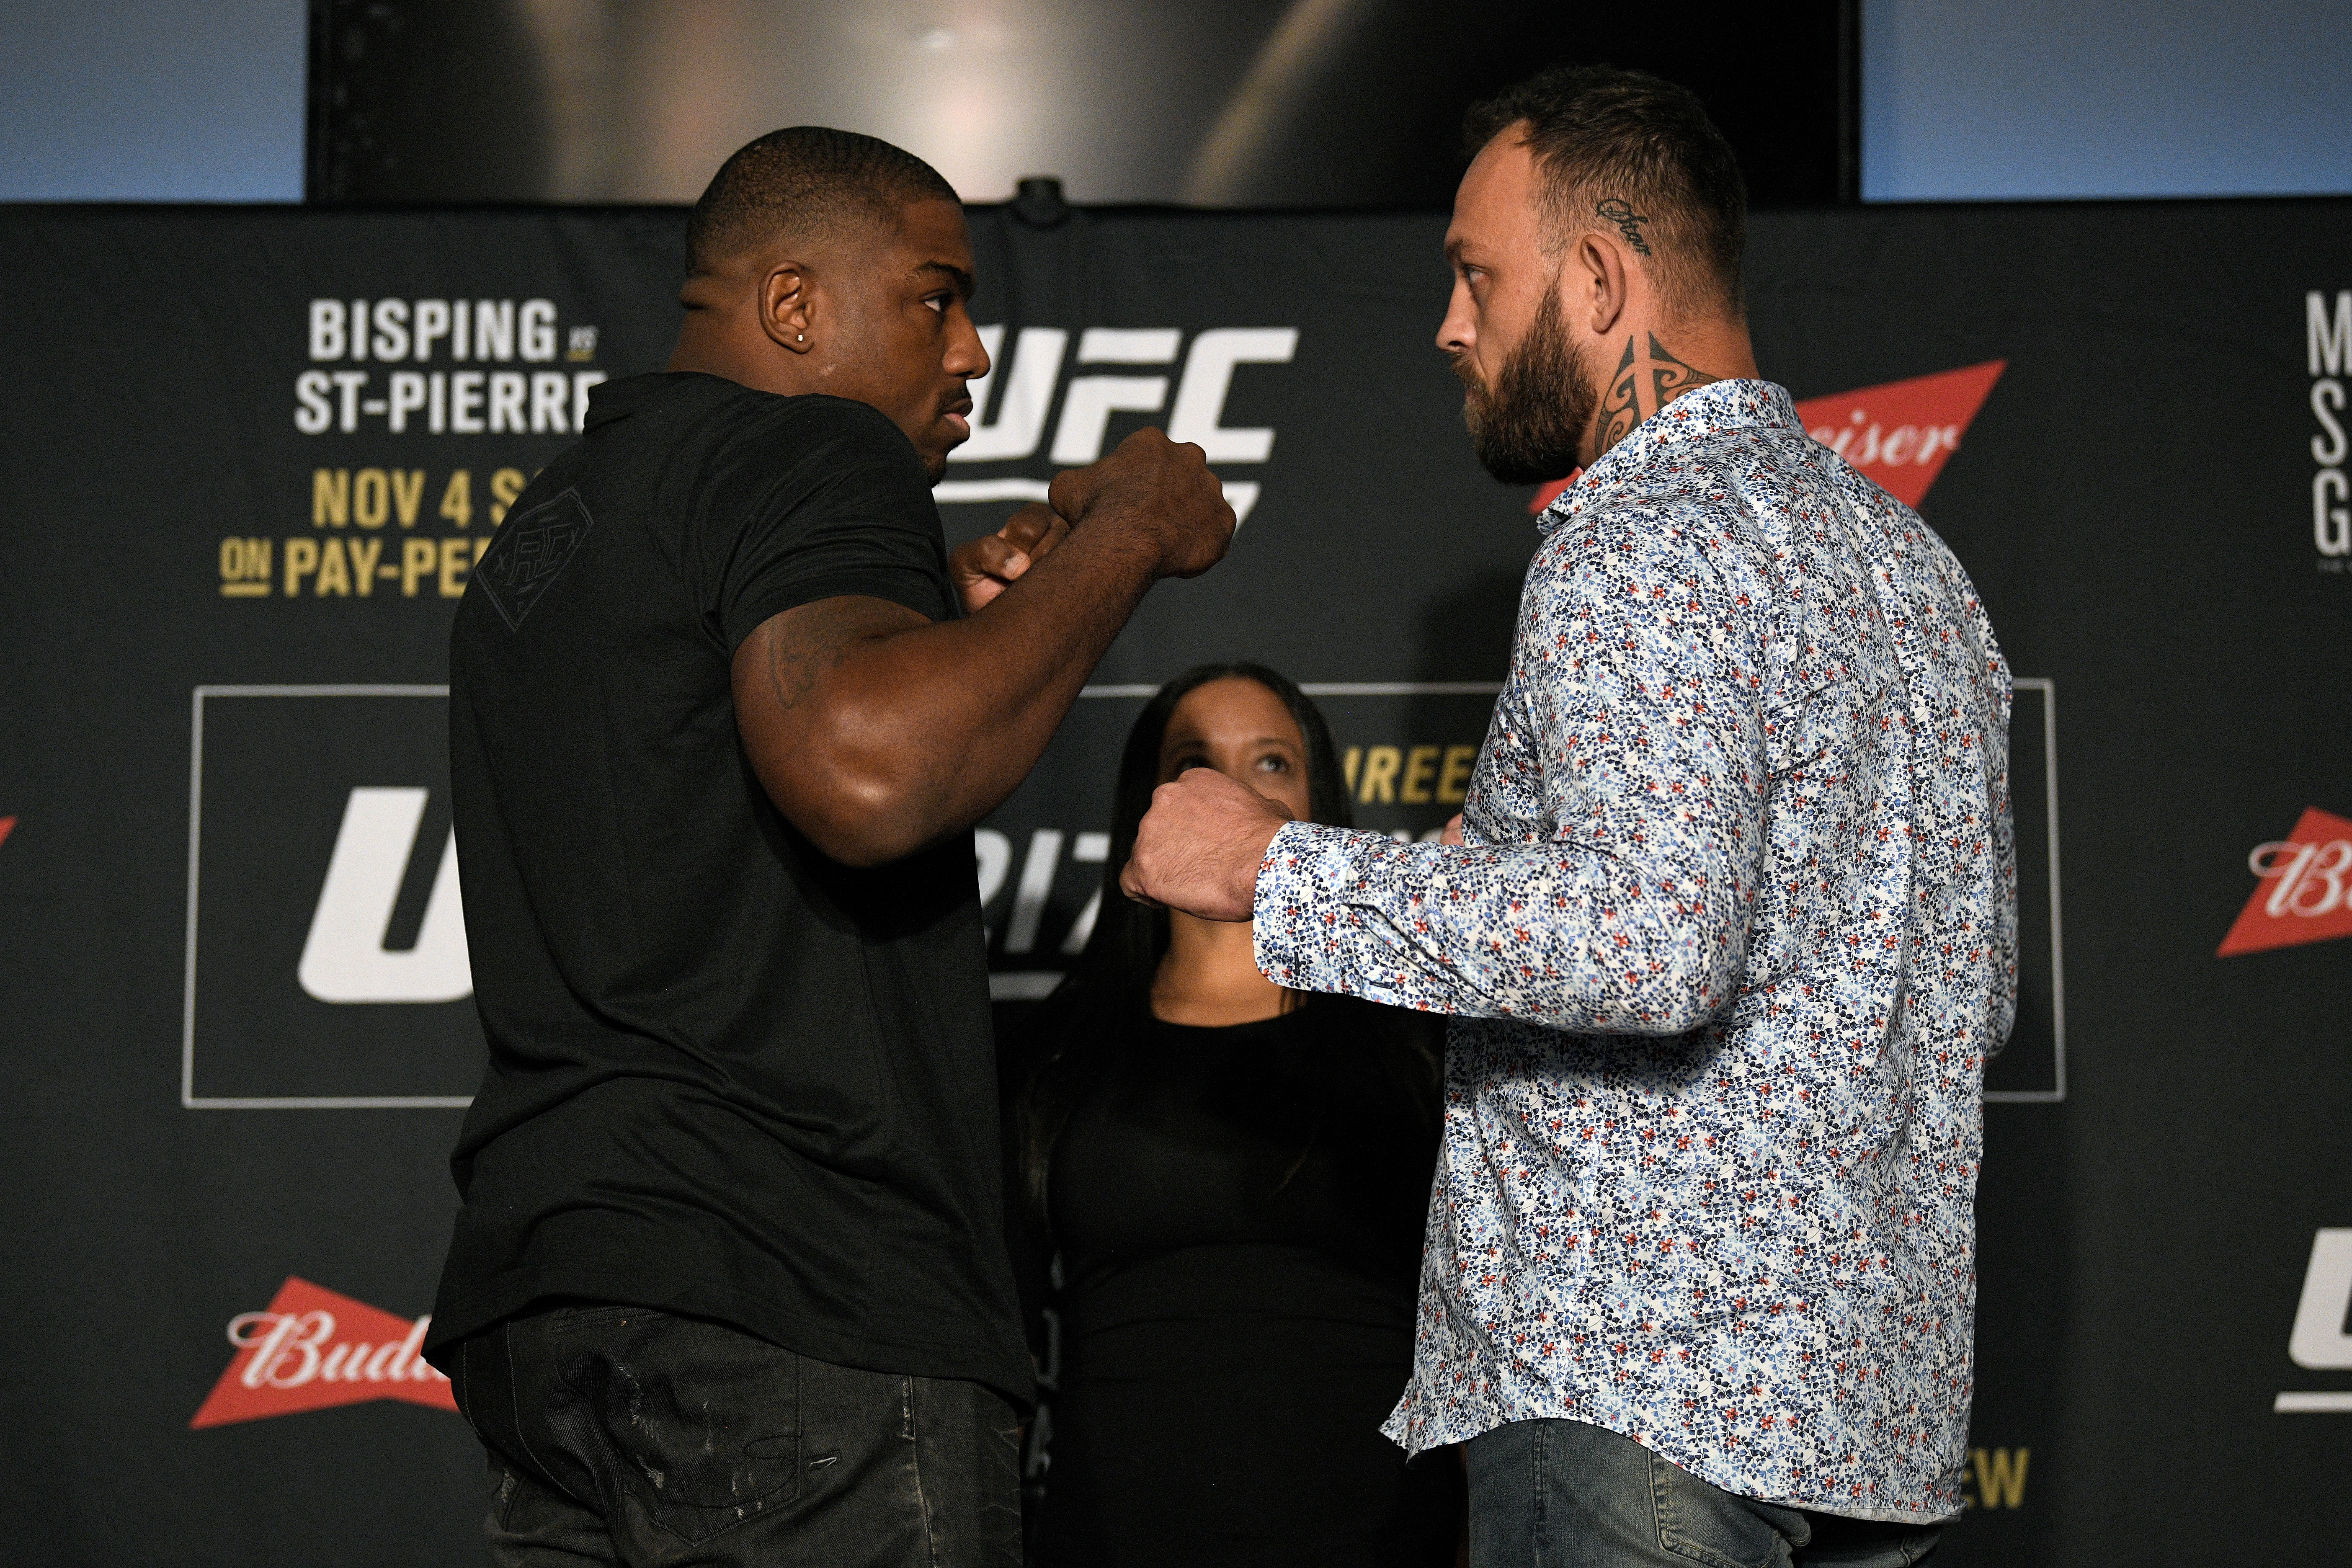 NEW YORK, NY - NOVEMBER 01: (L-R) Opponents Walt Harris and <a href='../fighter/mark-godbeer'><a href='../fighter/mark-godbeer'>Mark Godbeer</a></a> of England face off during the UFC 217 <a href='../event/<a href='../event/Ultimate-Brazil'>Ultimate-</a>Brazil’>Ultimate </a>Media Day inside the Theater Lobby at Madison Square Garden on November 1, 2017 in New York City. (Photo by Jeff Bottari/Zuffa LLC/Zuffa LLC via Getty Images)“ align=“center“/><br />The only loss Harris had as an amateur was to future UFC fighter <a href=